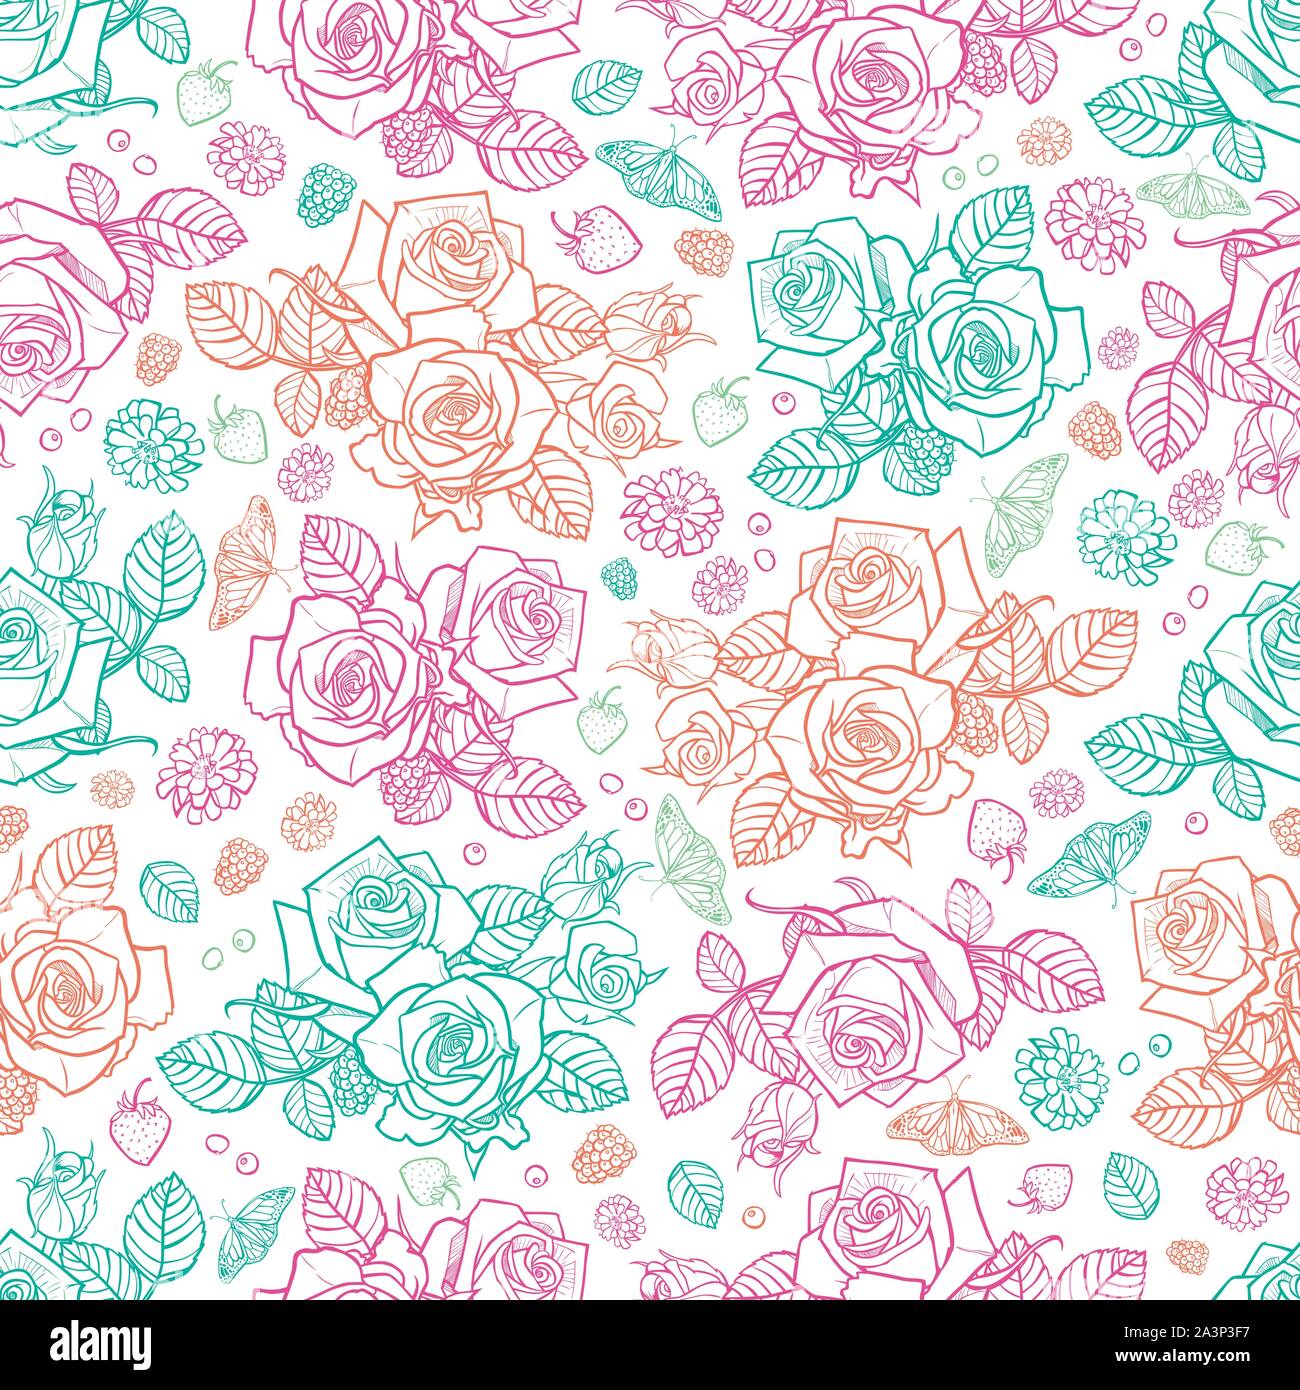 Vector white roses and berries seamless pattern. Perfect for fabric, scrapbooking and wallpaper projects. Stock Vector